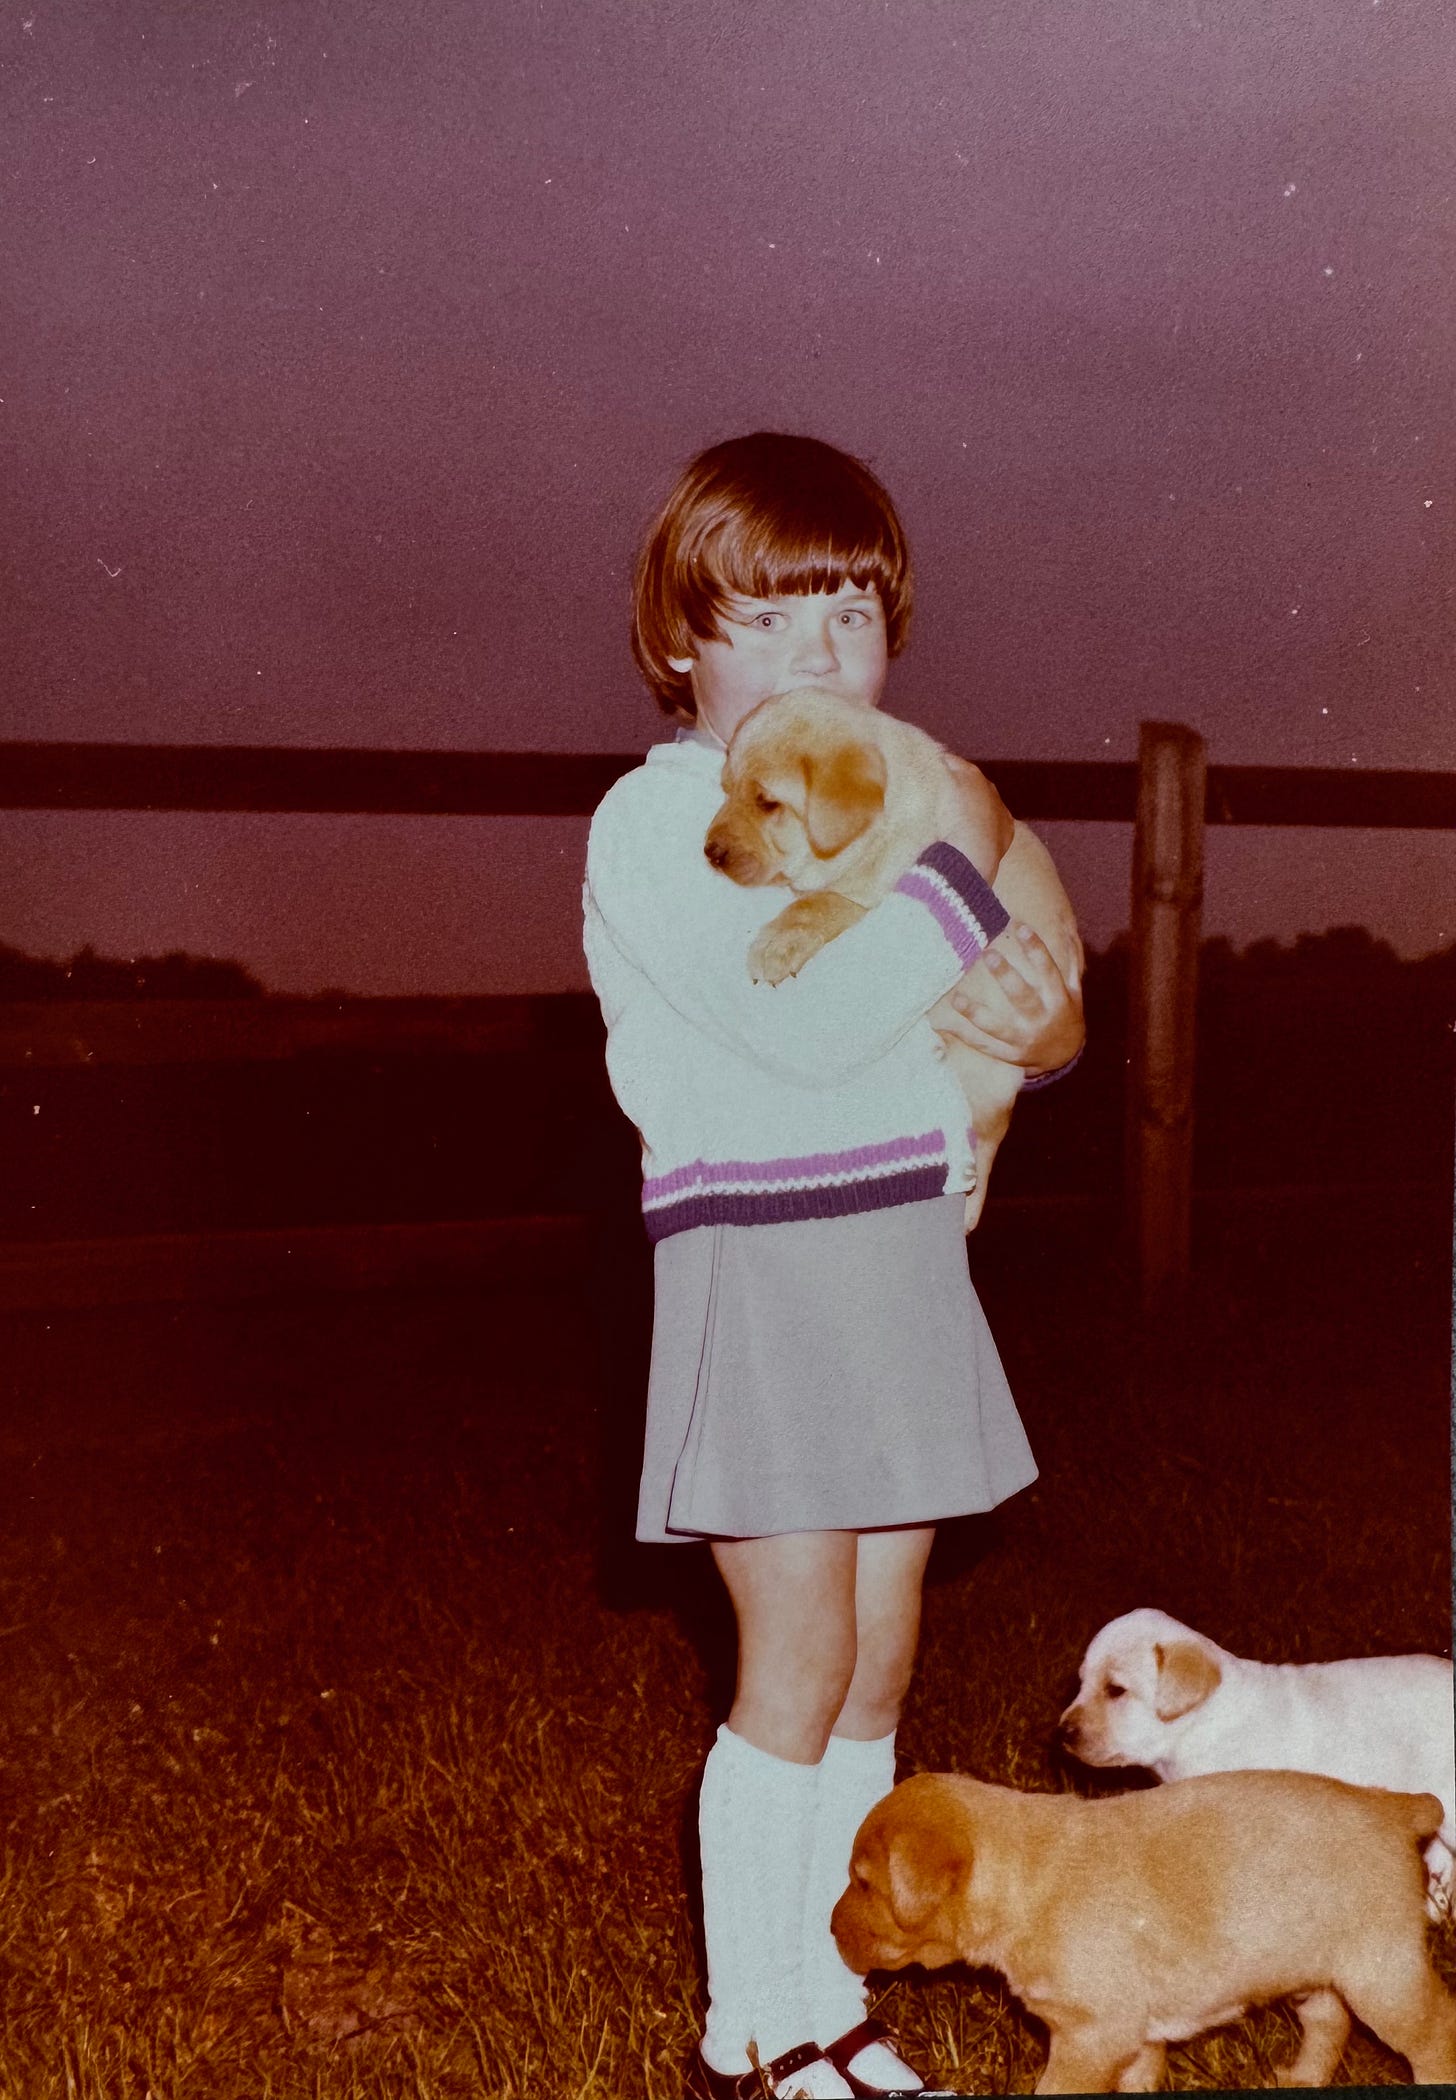 Author aged 6 years old holding a 4 week old golden Labrador puppy